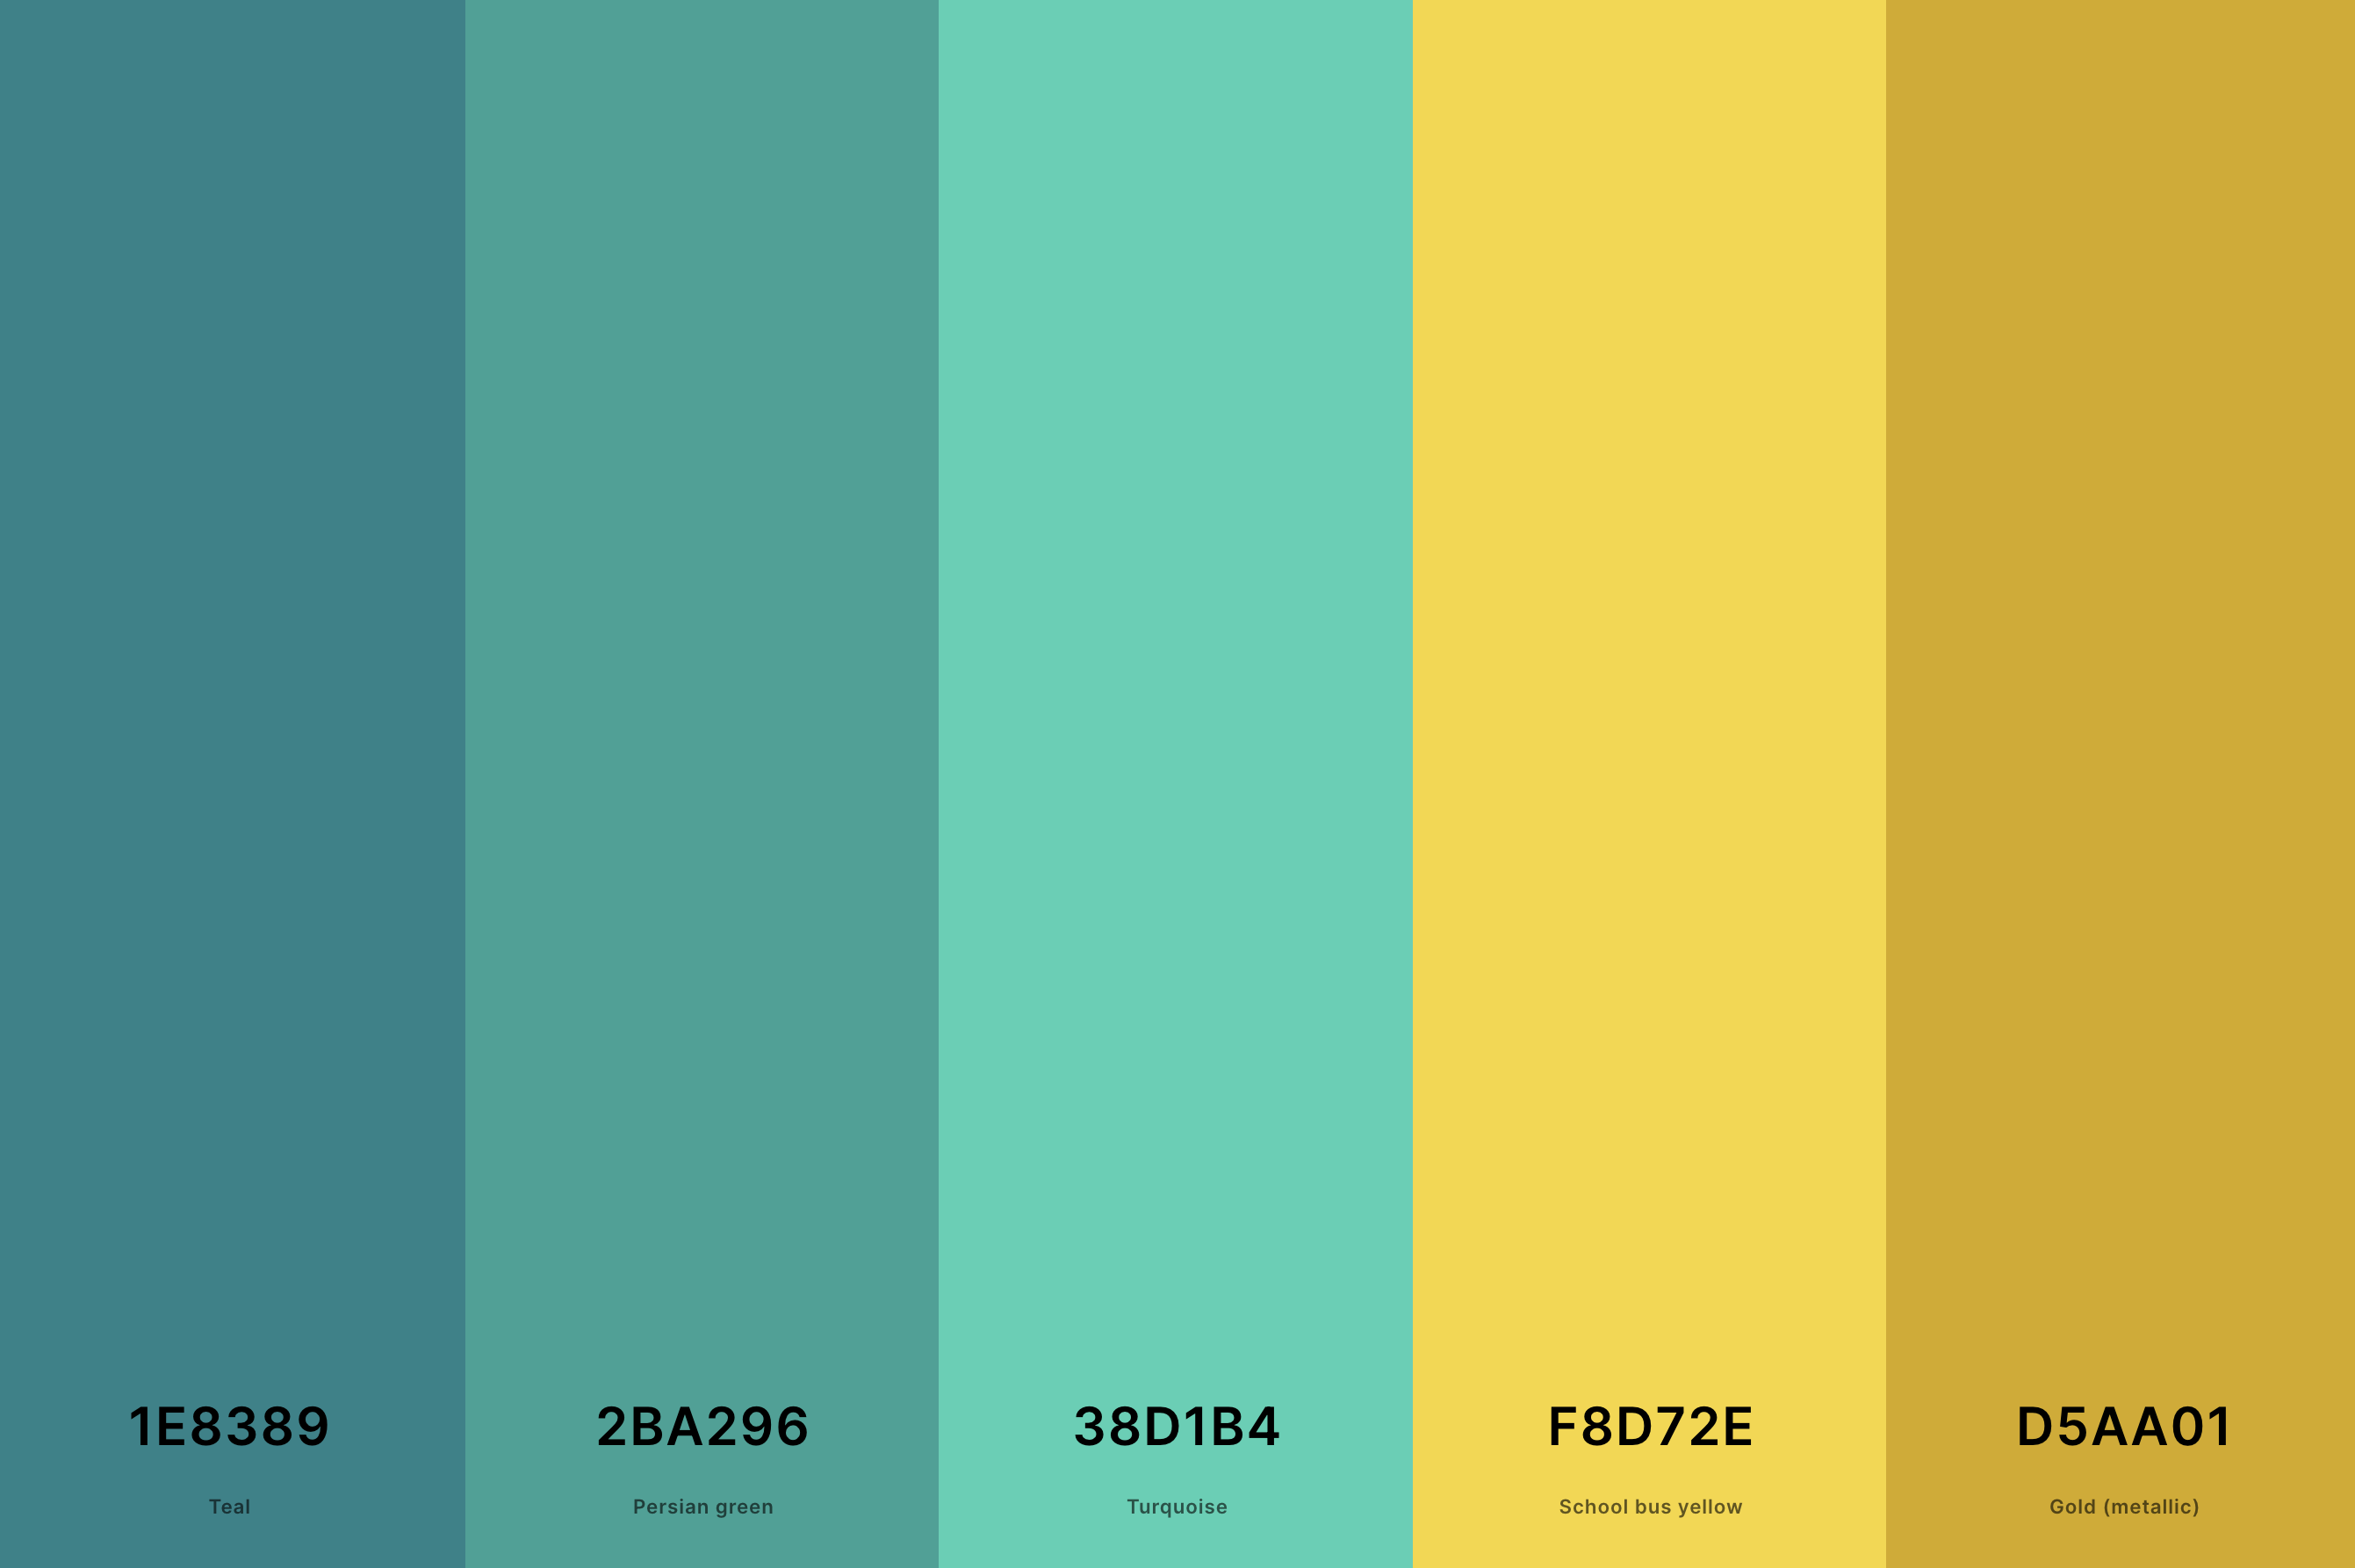 17. Teal And Gold Color Palette Color Palette with Teal (Hex #1E8389) + Persian Green (Hex #2BA296) + Turquoise (Hex #38D1B4) + School Bus Yellow (Hex #F8D72E) + Gold (Metallic) (Hex #D5AA01) Color Palette with Hex Codes